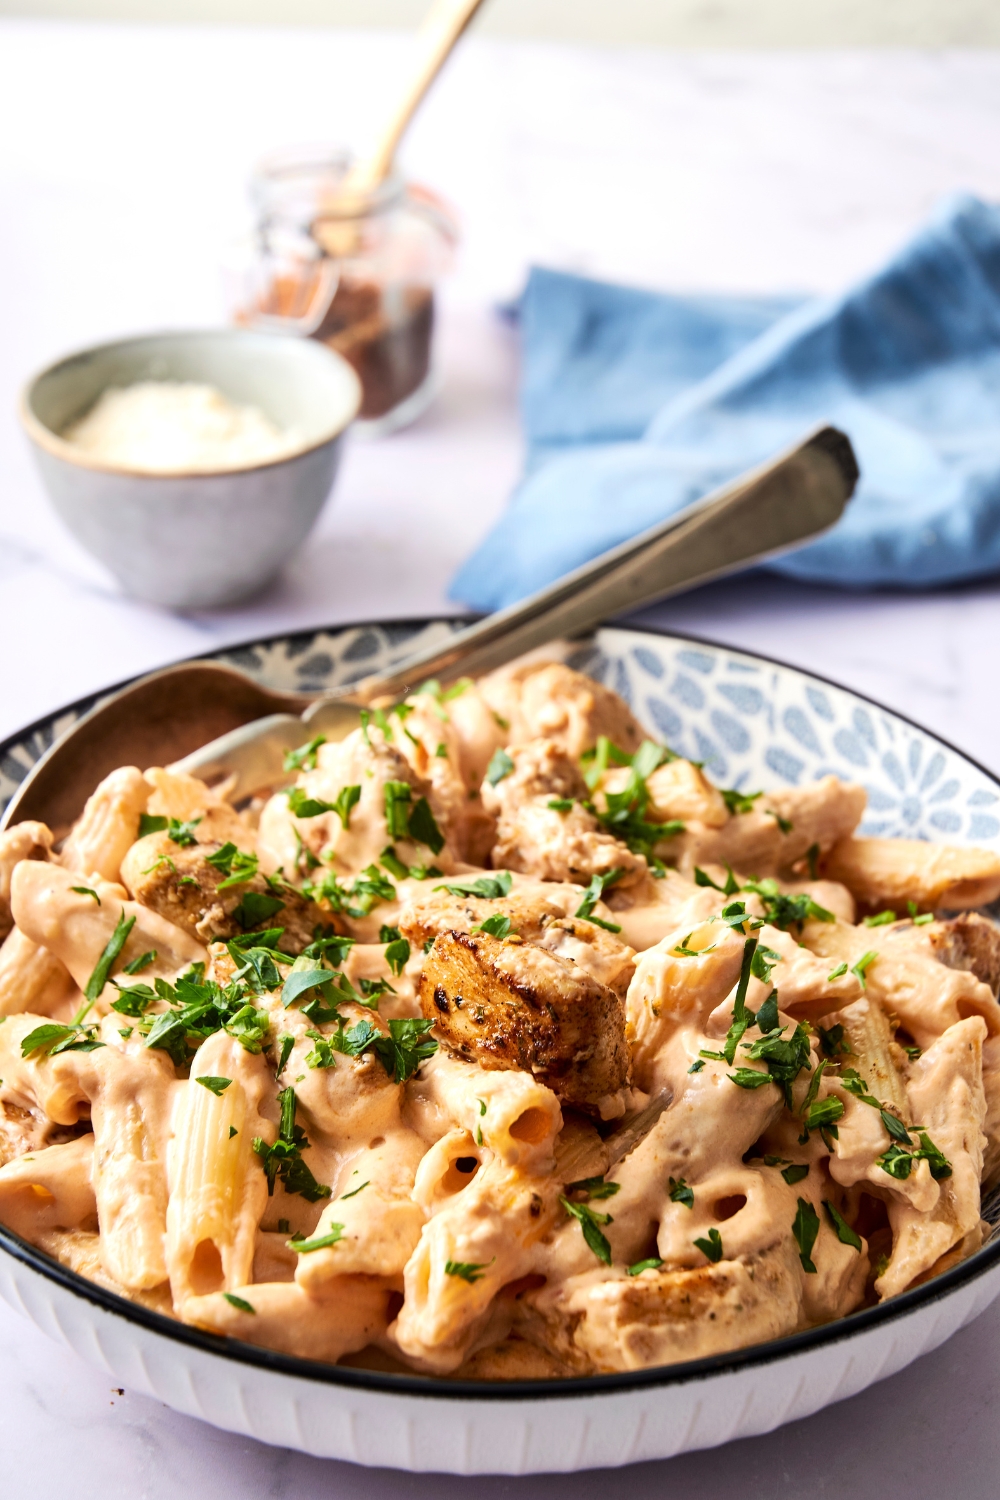 A blue and white serving bowl is piled high with Buffalo wild wings garlic parmesan chicken pasta. The dish has been garnished with fresh herbs. A set of serving utensils rest in the bowl, as well.